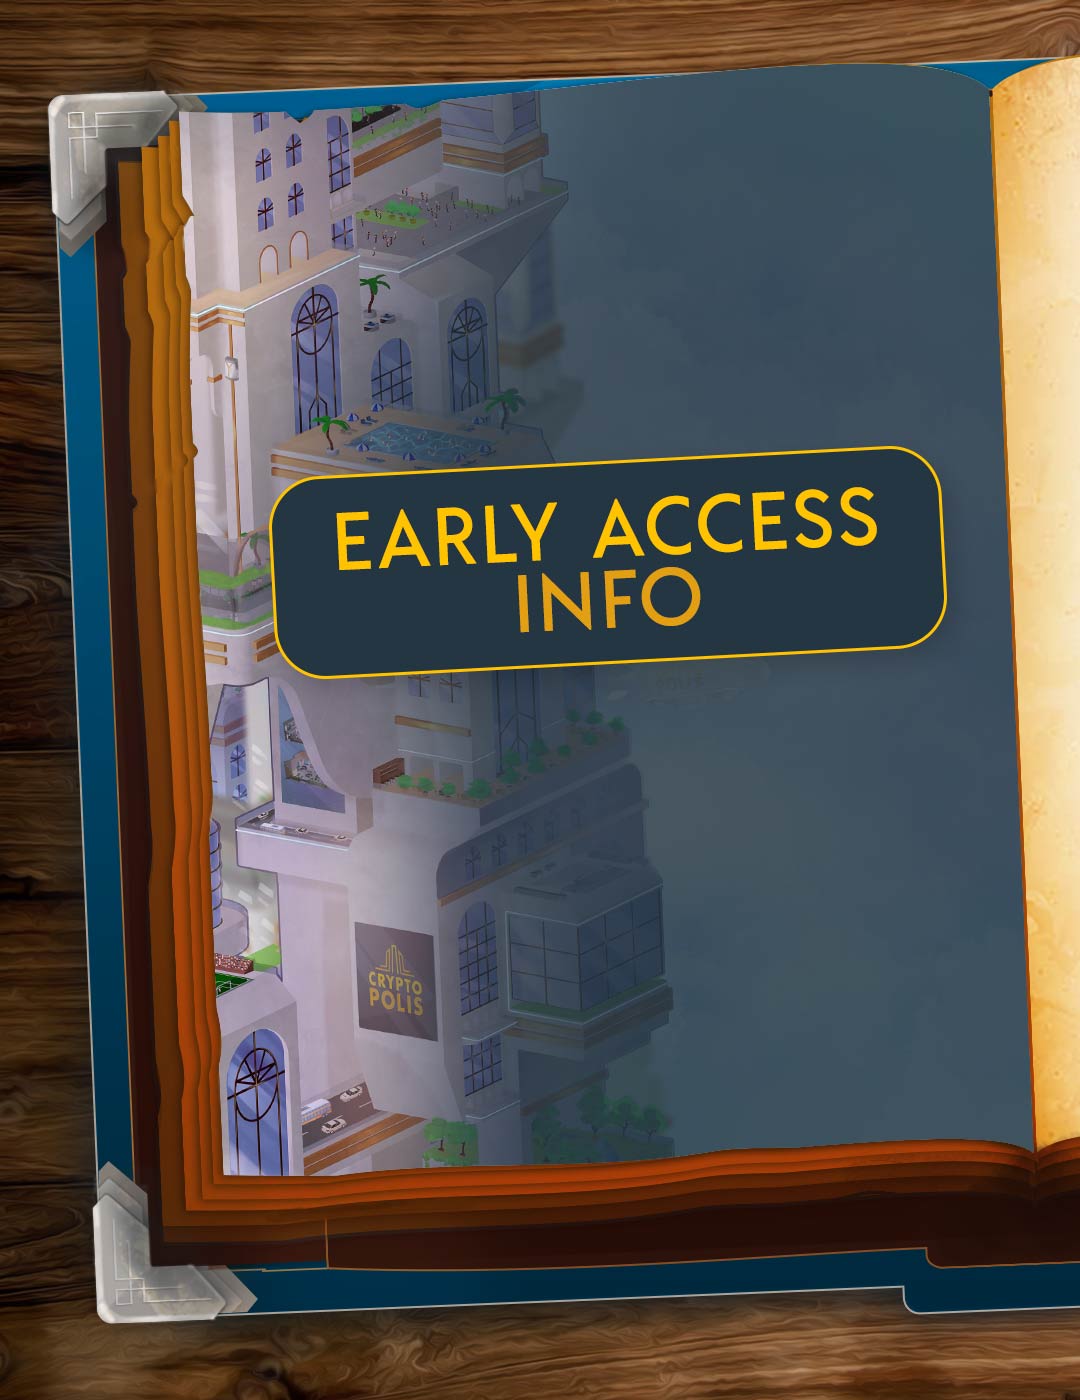 Early access info